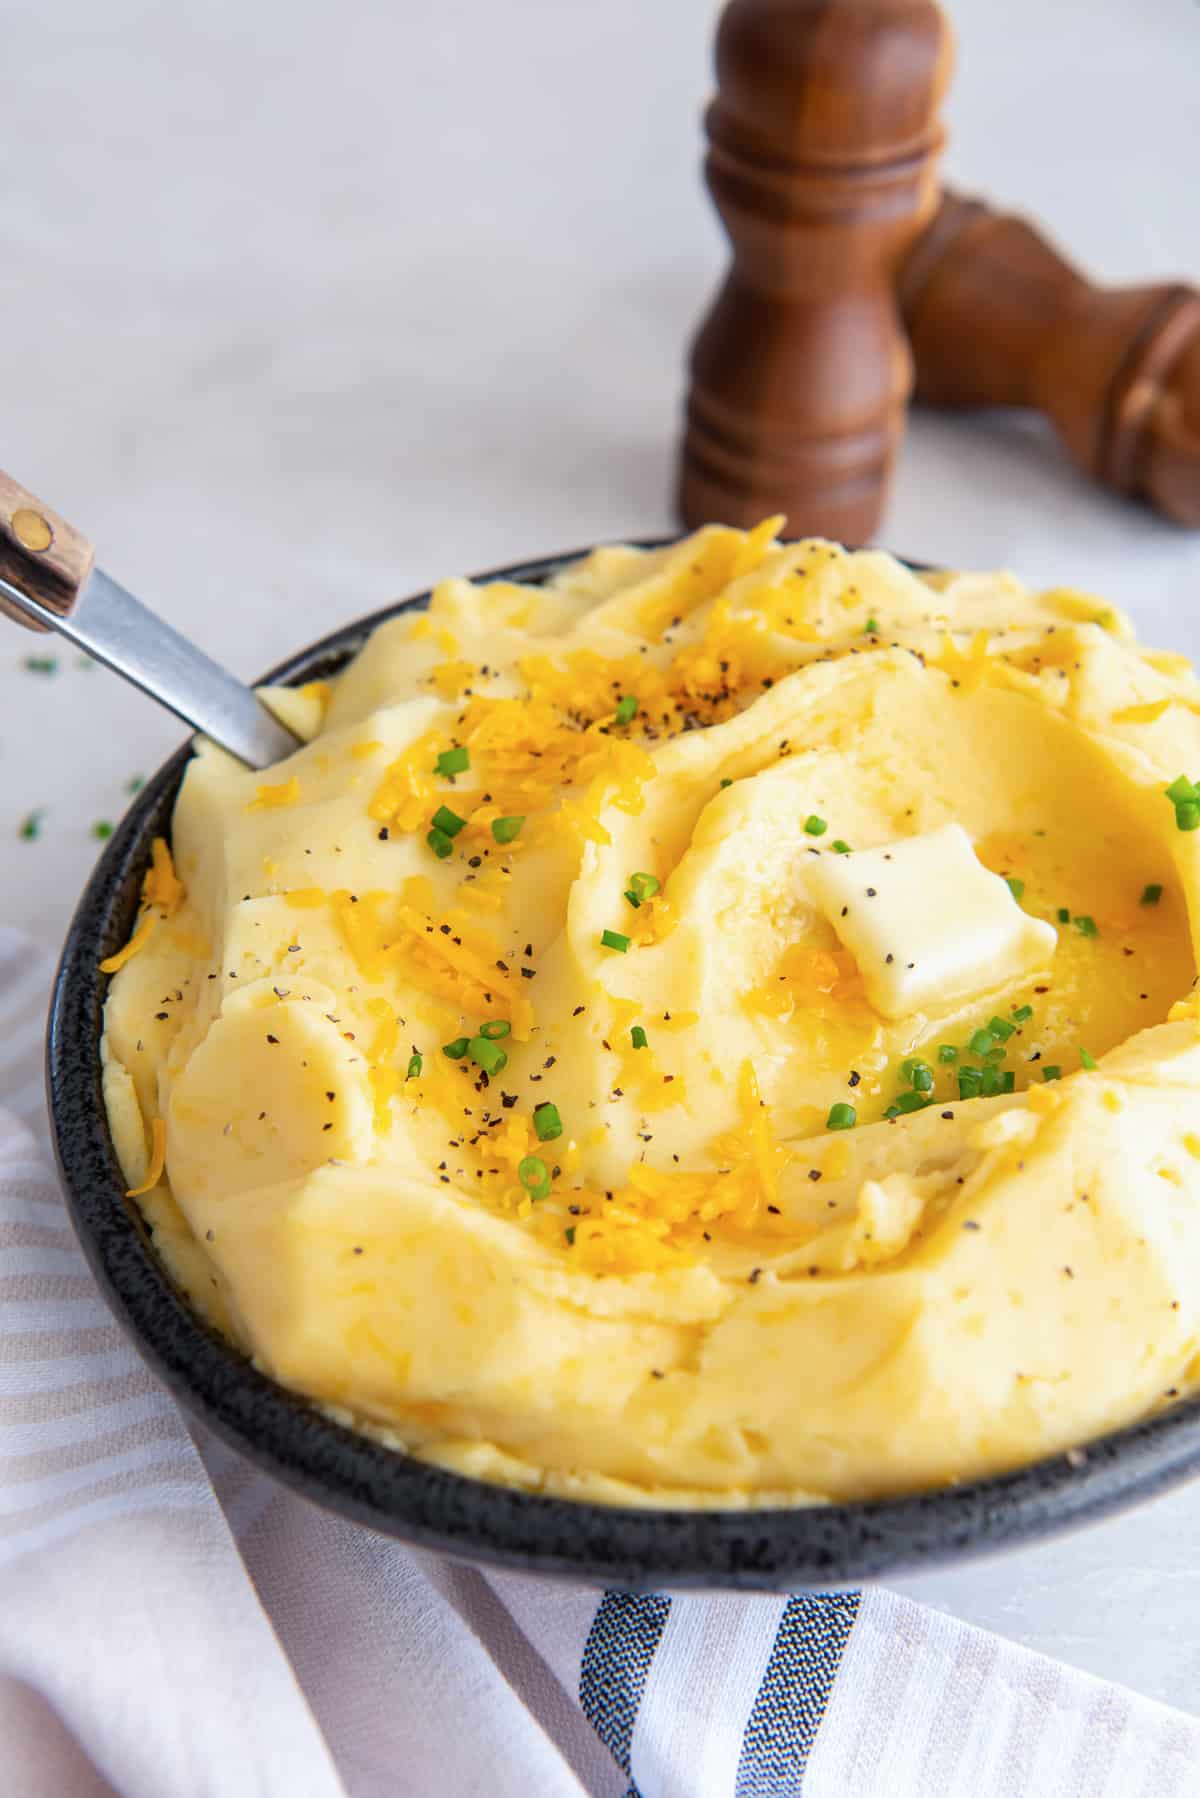 Mashed potatoes with cheese in a dark bowl with a serving spoon.